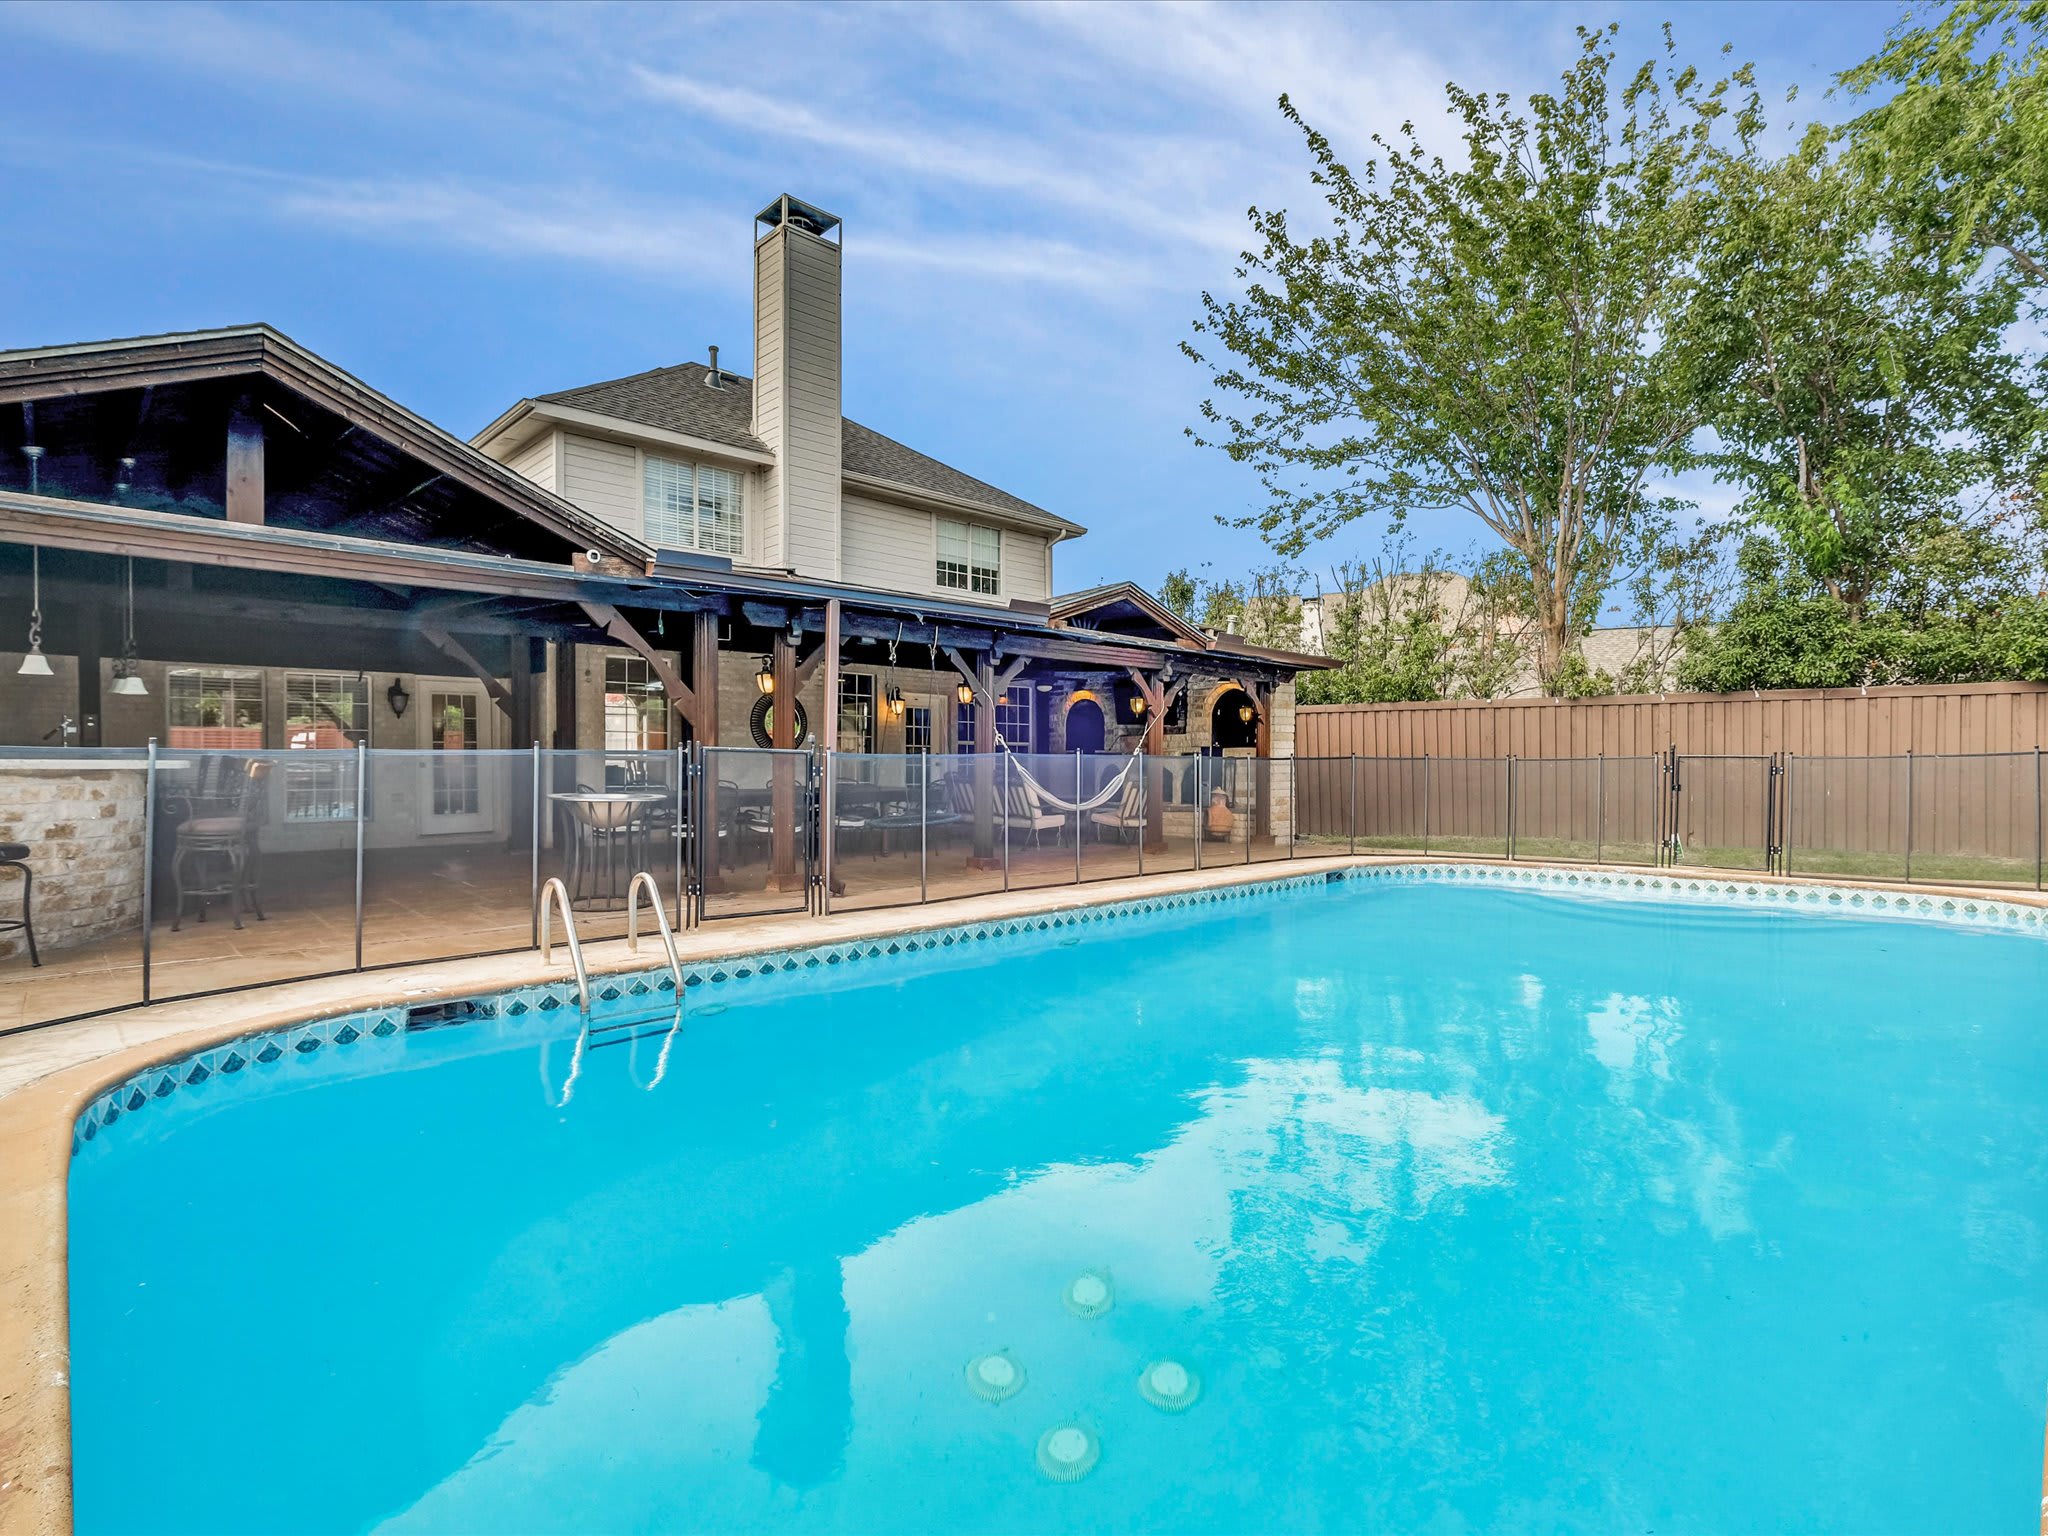 Nothing beats the Texas heat like a cool dip in the pool. What are you waiting for? Jump in!